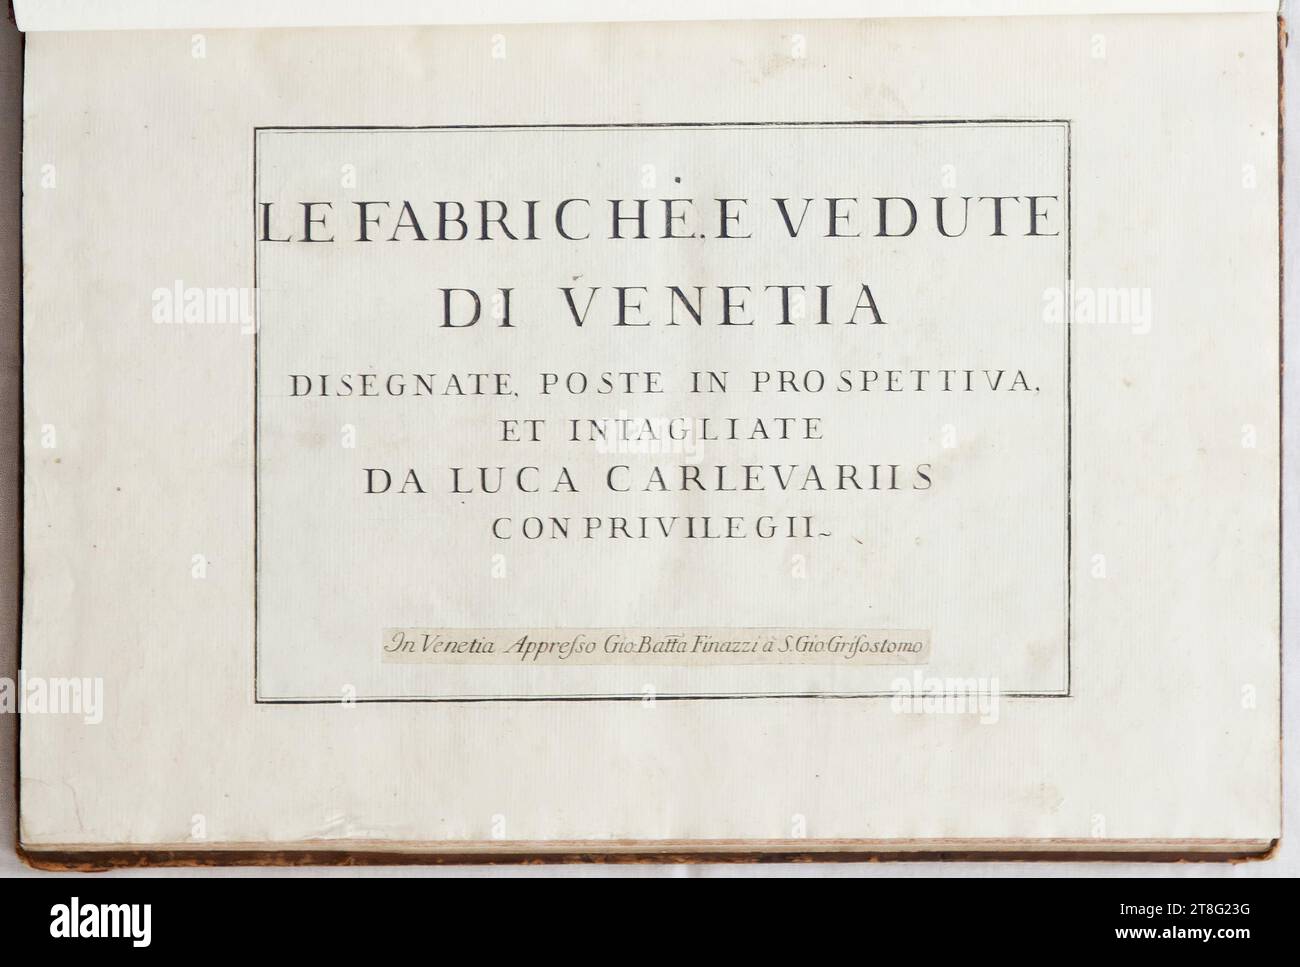 Luca Carlevarijs (1663 - c. 1730), artist, Le Fabriche, e Vedute di Venetia, Origin of illustrations: Before 1703 Publication:, etching on paper vergé, book size: 45.4 x 31.4 cm, plates each numbered consecutively at the bottom '1-103' plates 1-101 lower right and plates 102-103 Stock Photo